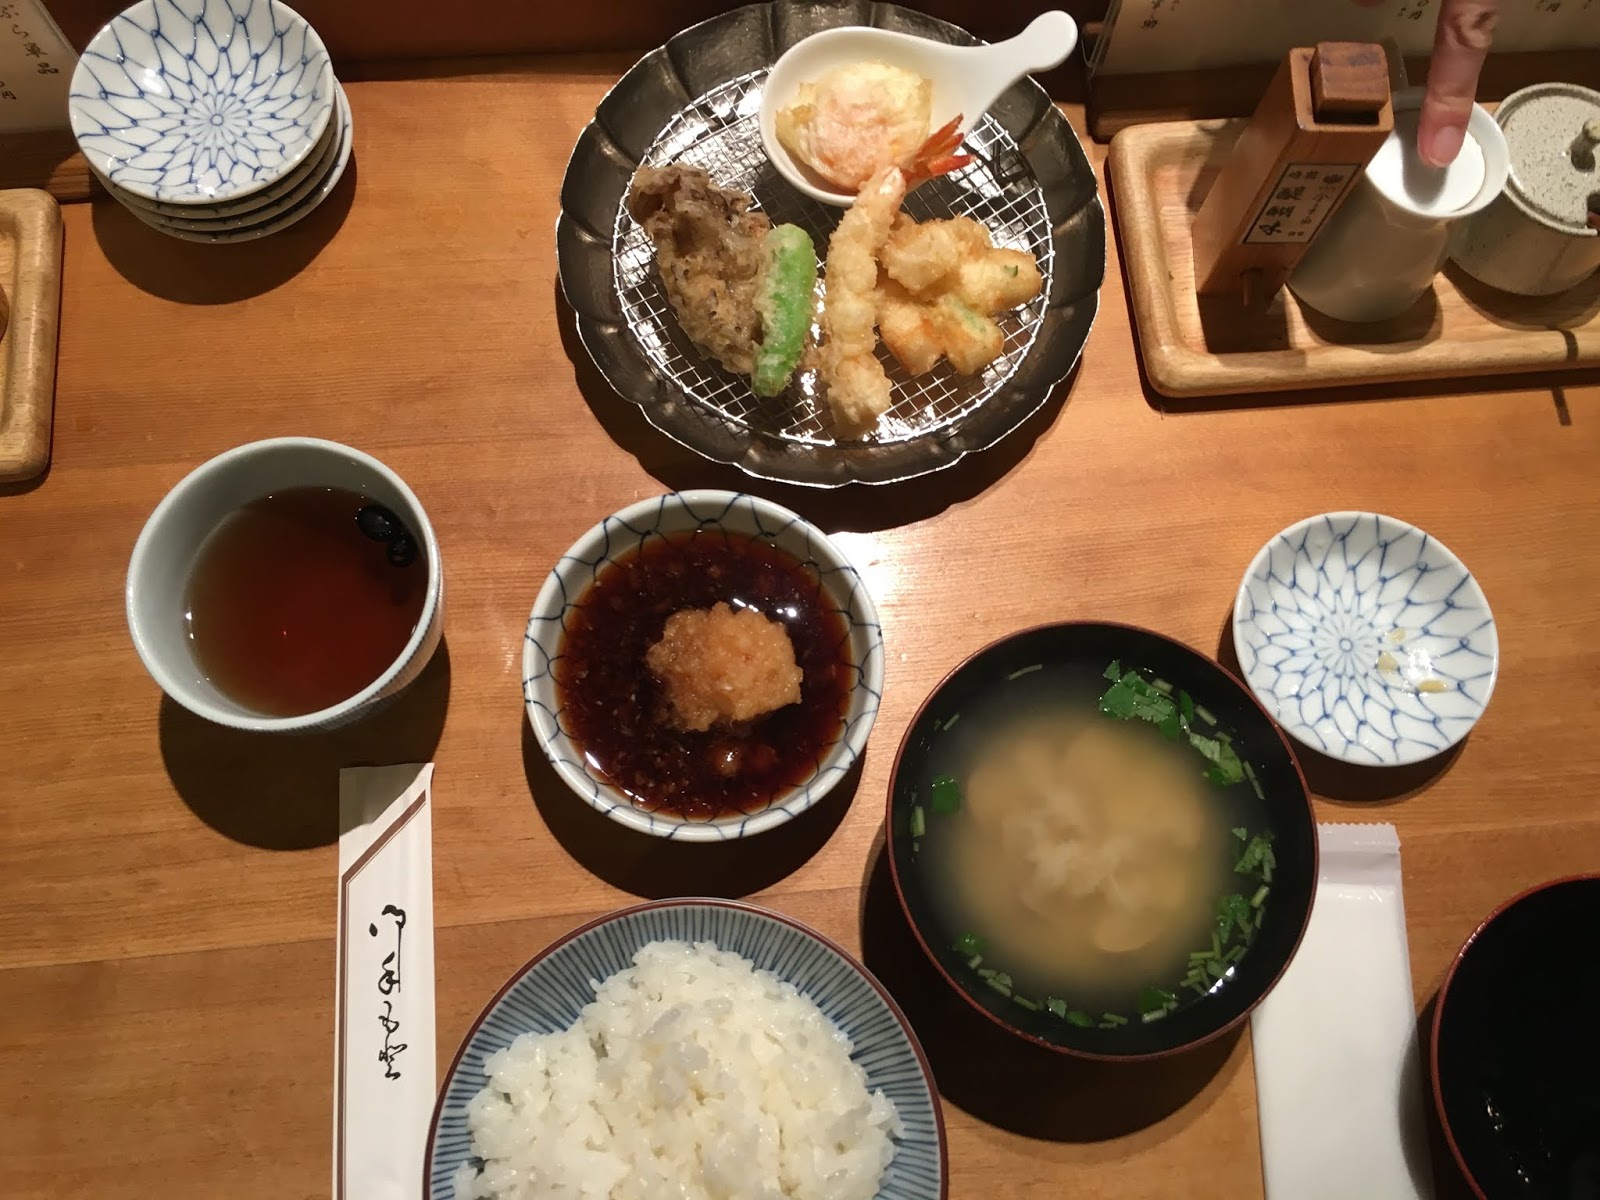 WHAT TO EAT IN TOKYO